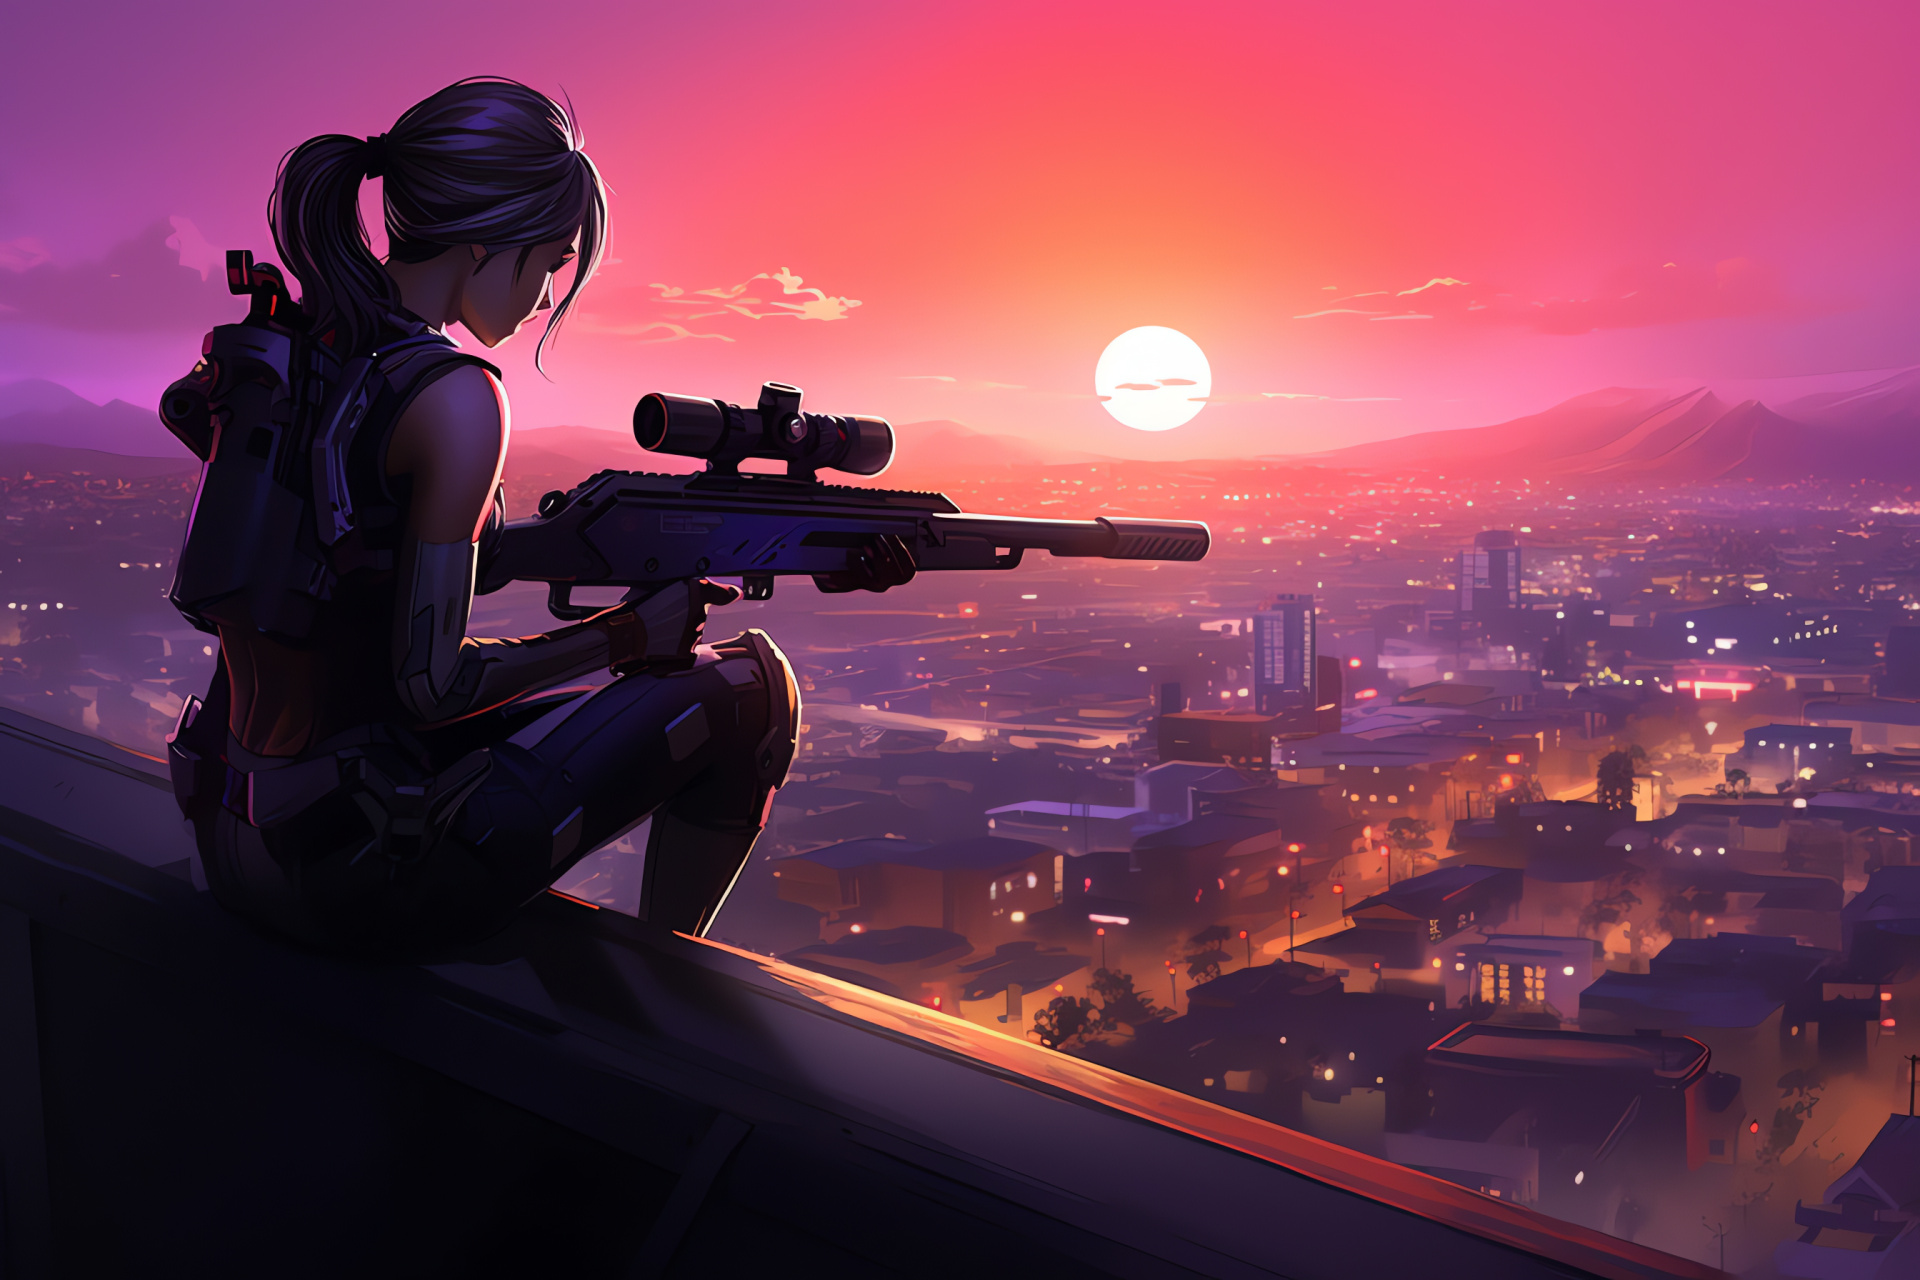 Widowmaker in Overwatch action, Sunset Hollywood scenery, Sharpshooting prowess, Digital entertainment, Dynamic character showcase, HD Desktop Wallpaper